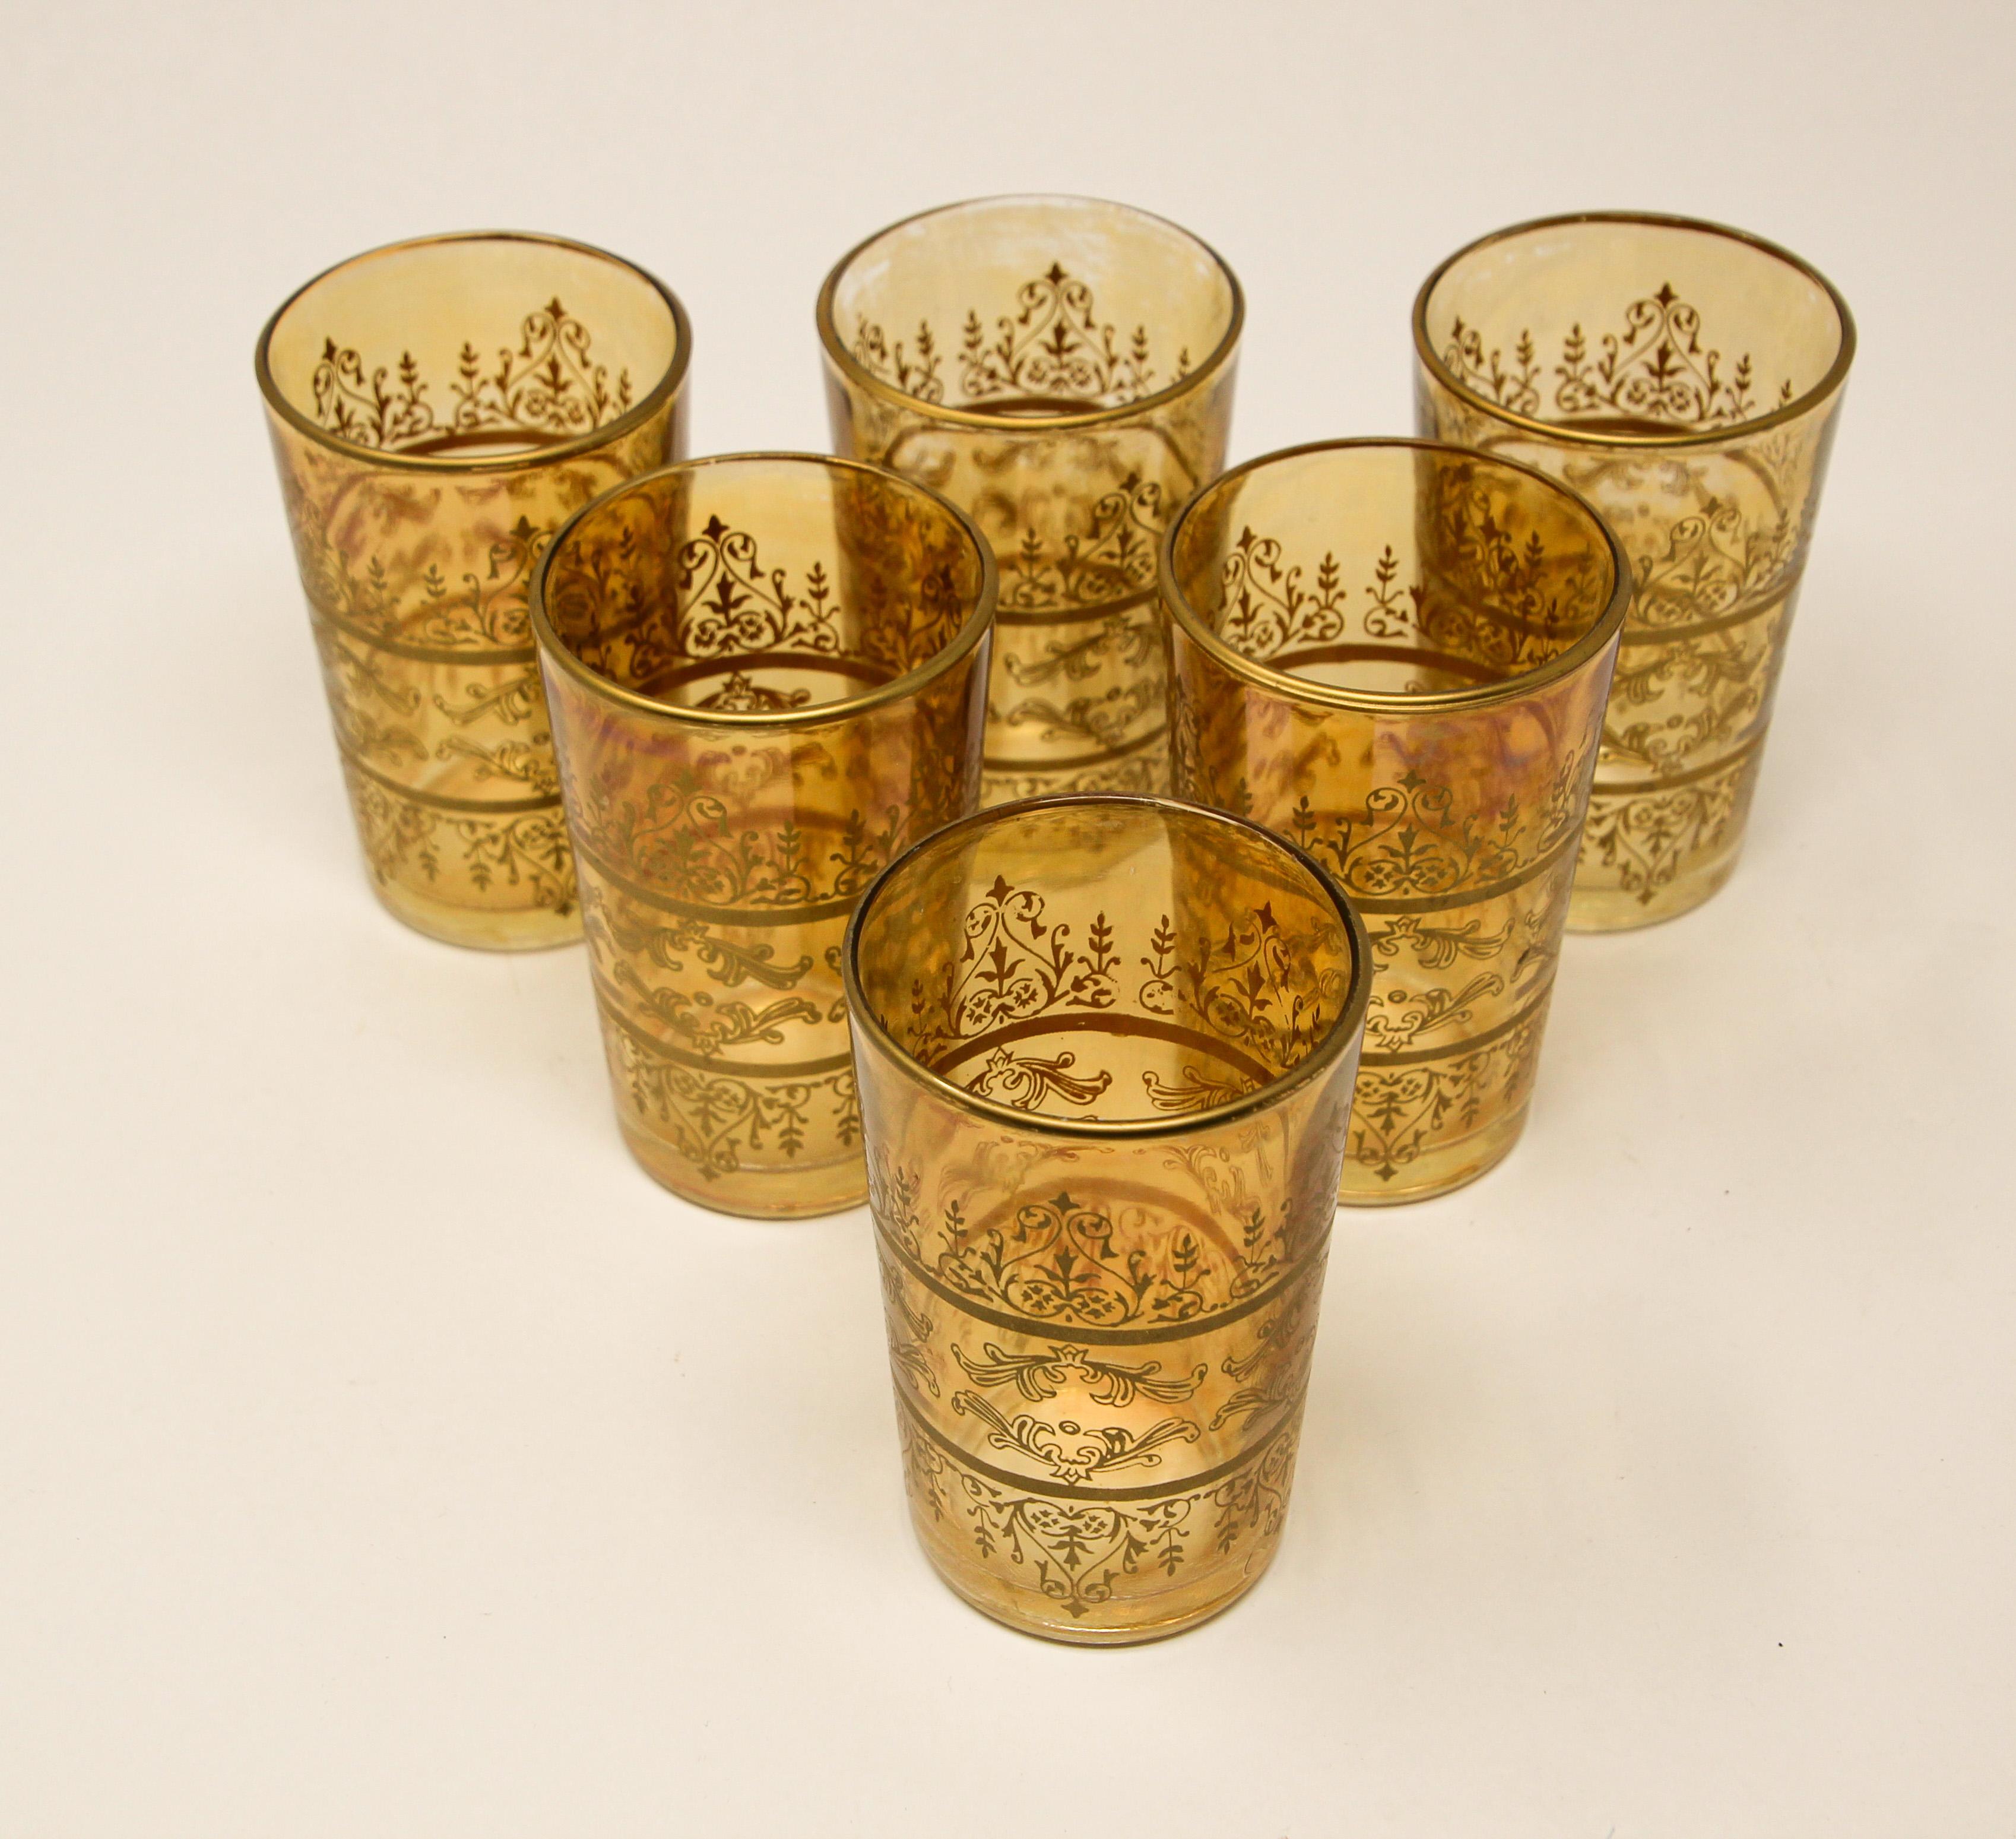 Set of six Moorish drinking glasses with gold and amber design
Decorated with a gold pattern Moorish frieze.
Use these elegant glasses for Moroccan tea, or any hot or cold drink.
Great barware statement, perfect for the holidays and gorgeous on